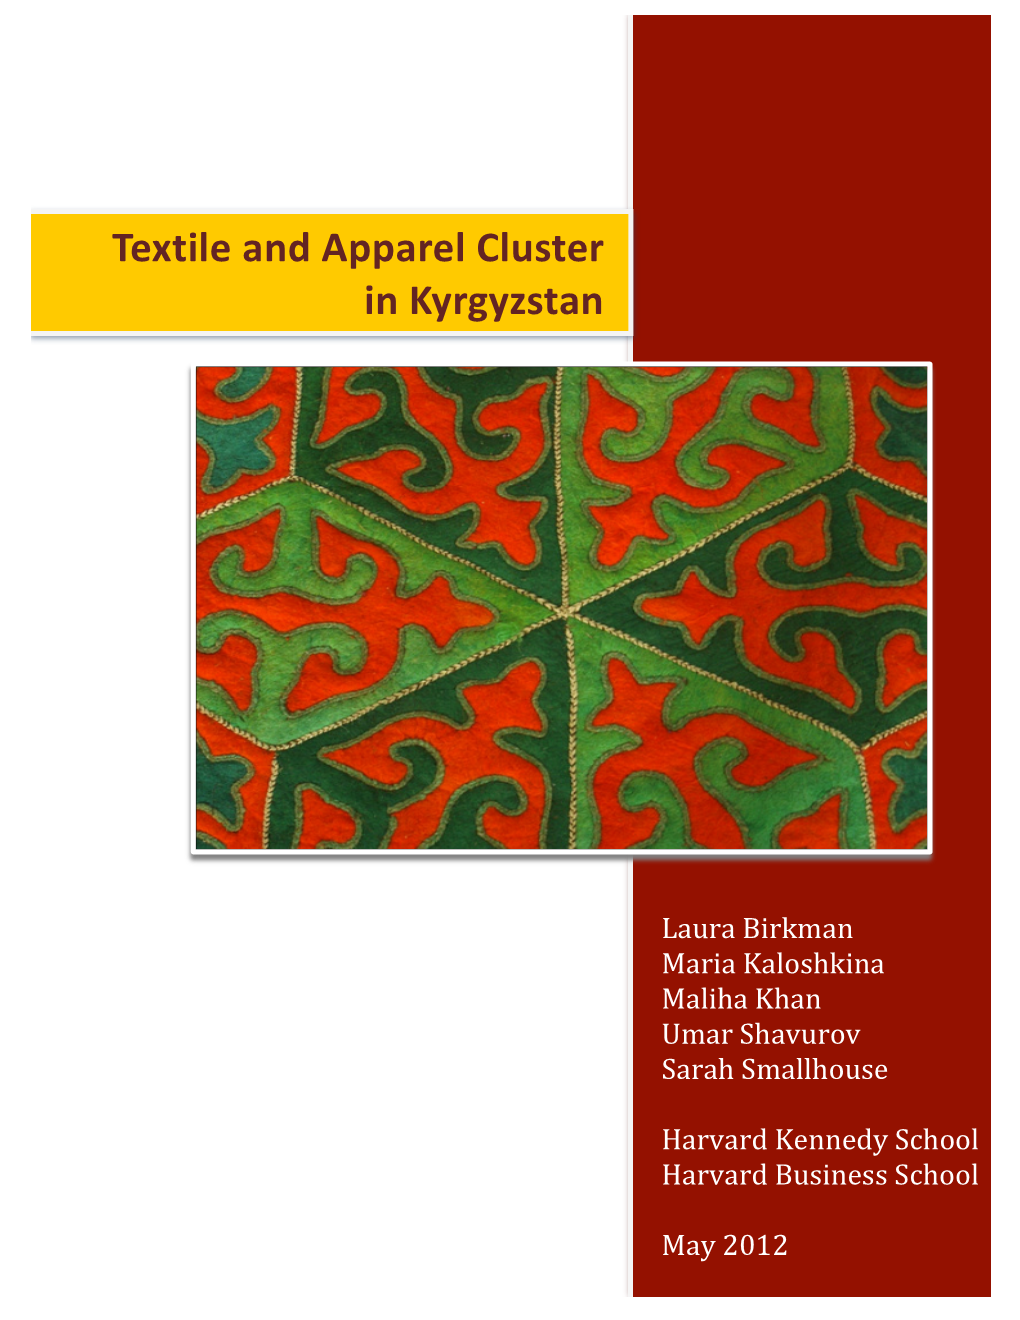 Textile and Apparel Cluster in Kyrgyzstan